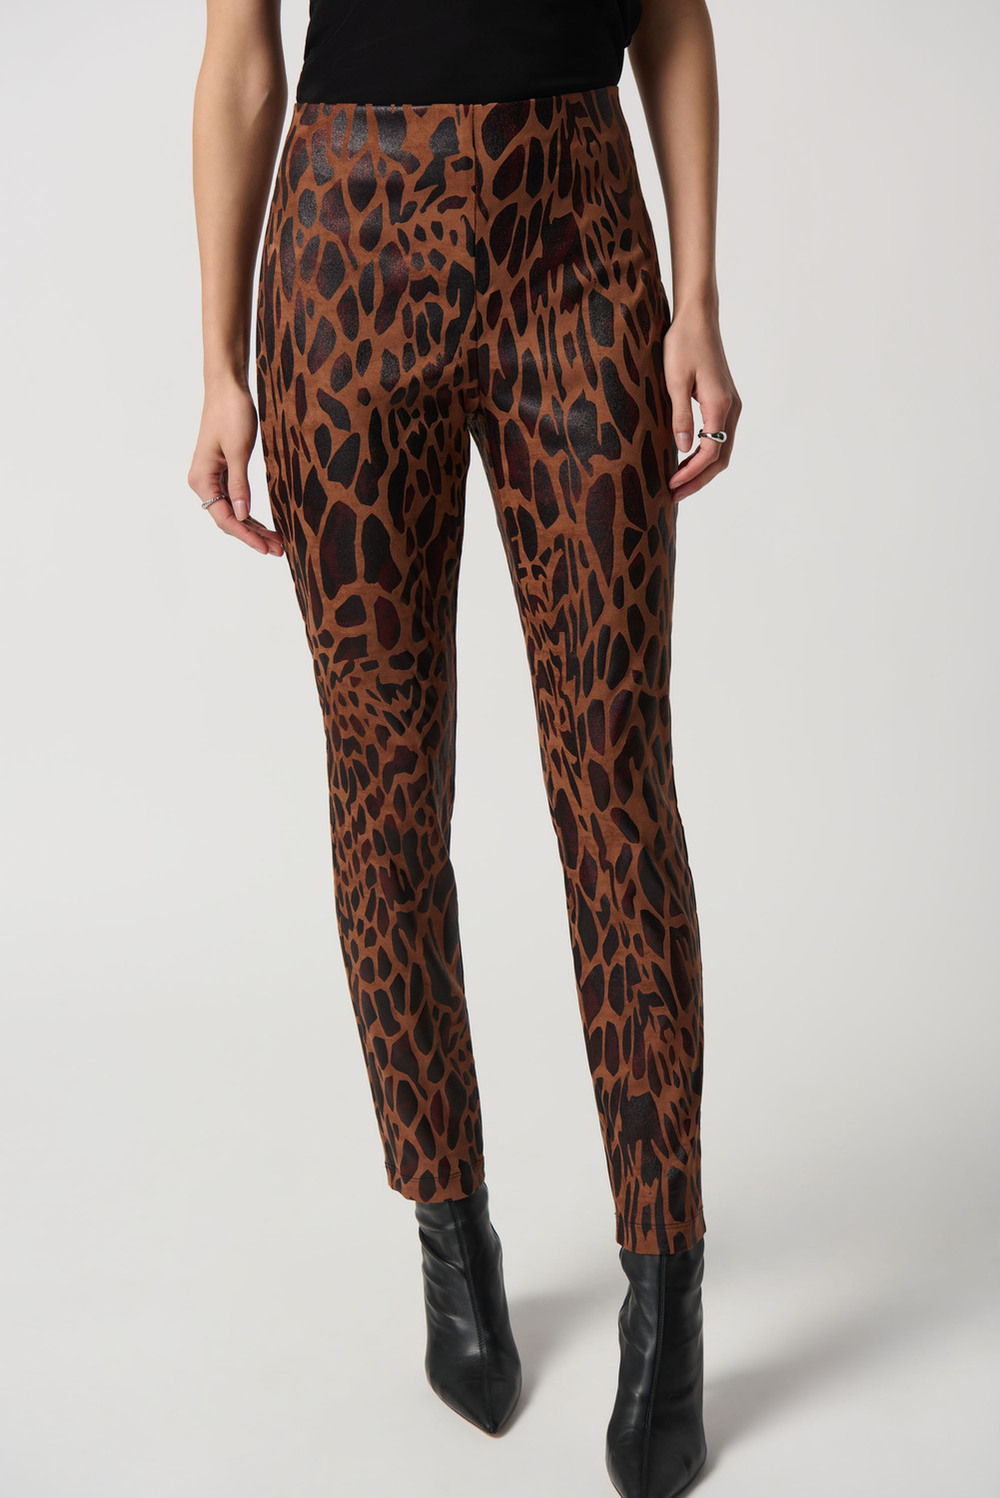 High Waist Pant Style 234283. Toffee/black